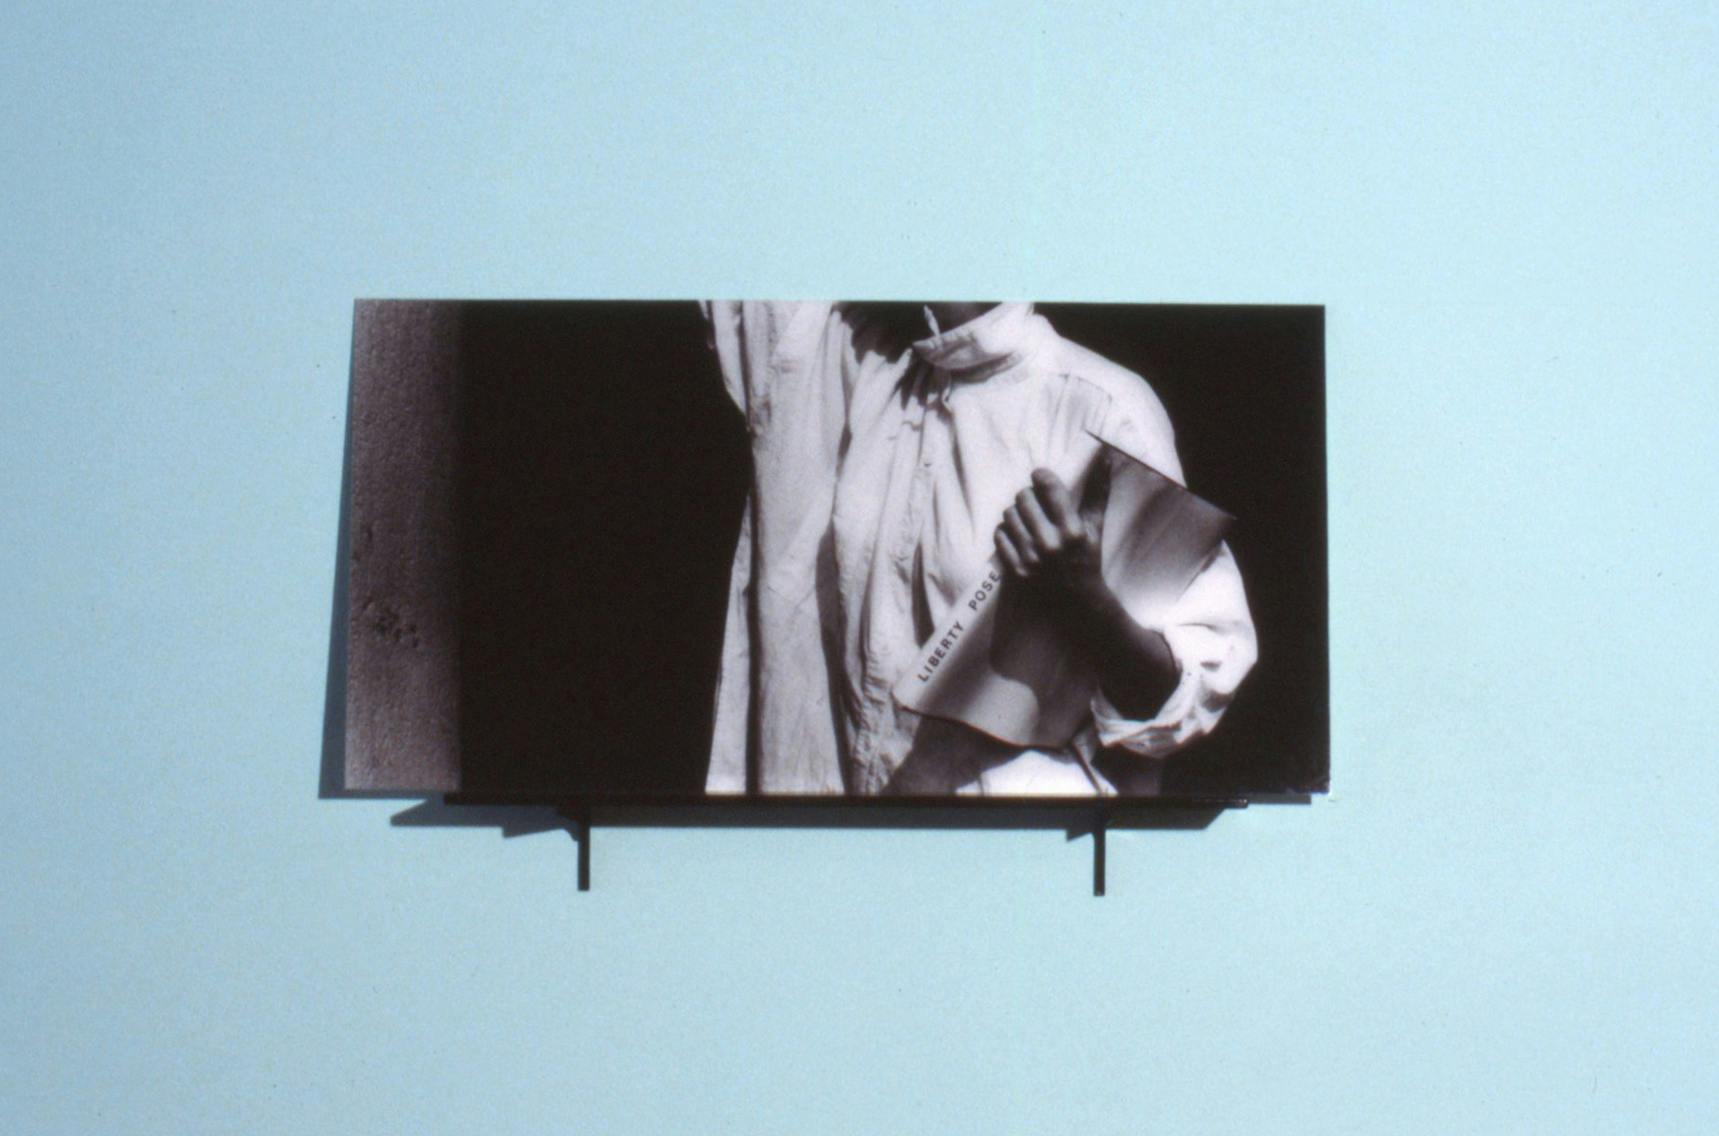 A black and white photograph mounted on a black shelf against a light blue wall. The photograph is of a person holding a book and they are only visible from the neck to the waist. 